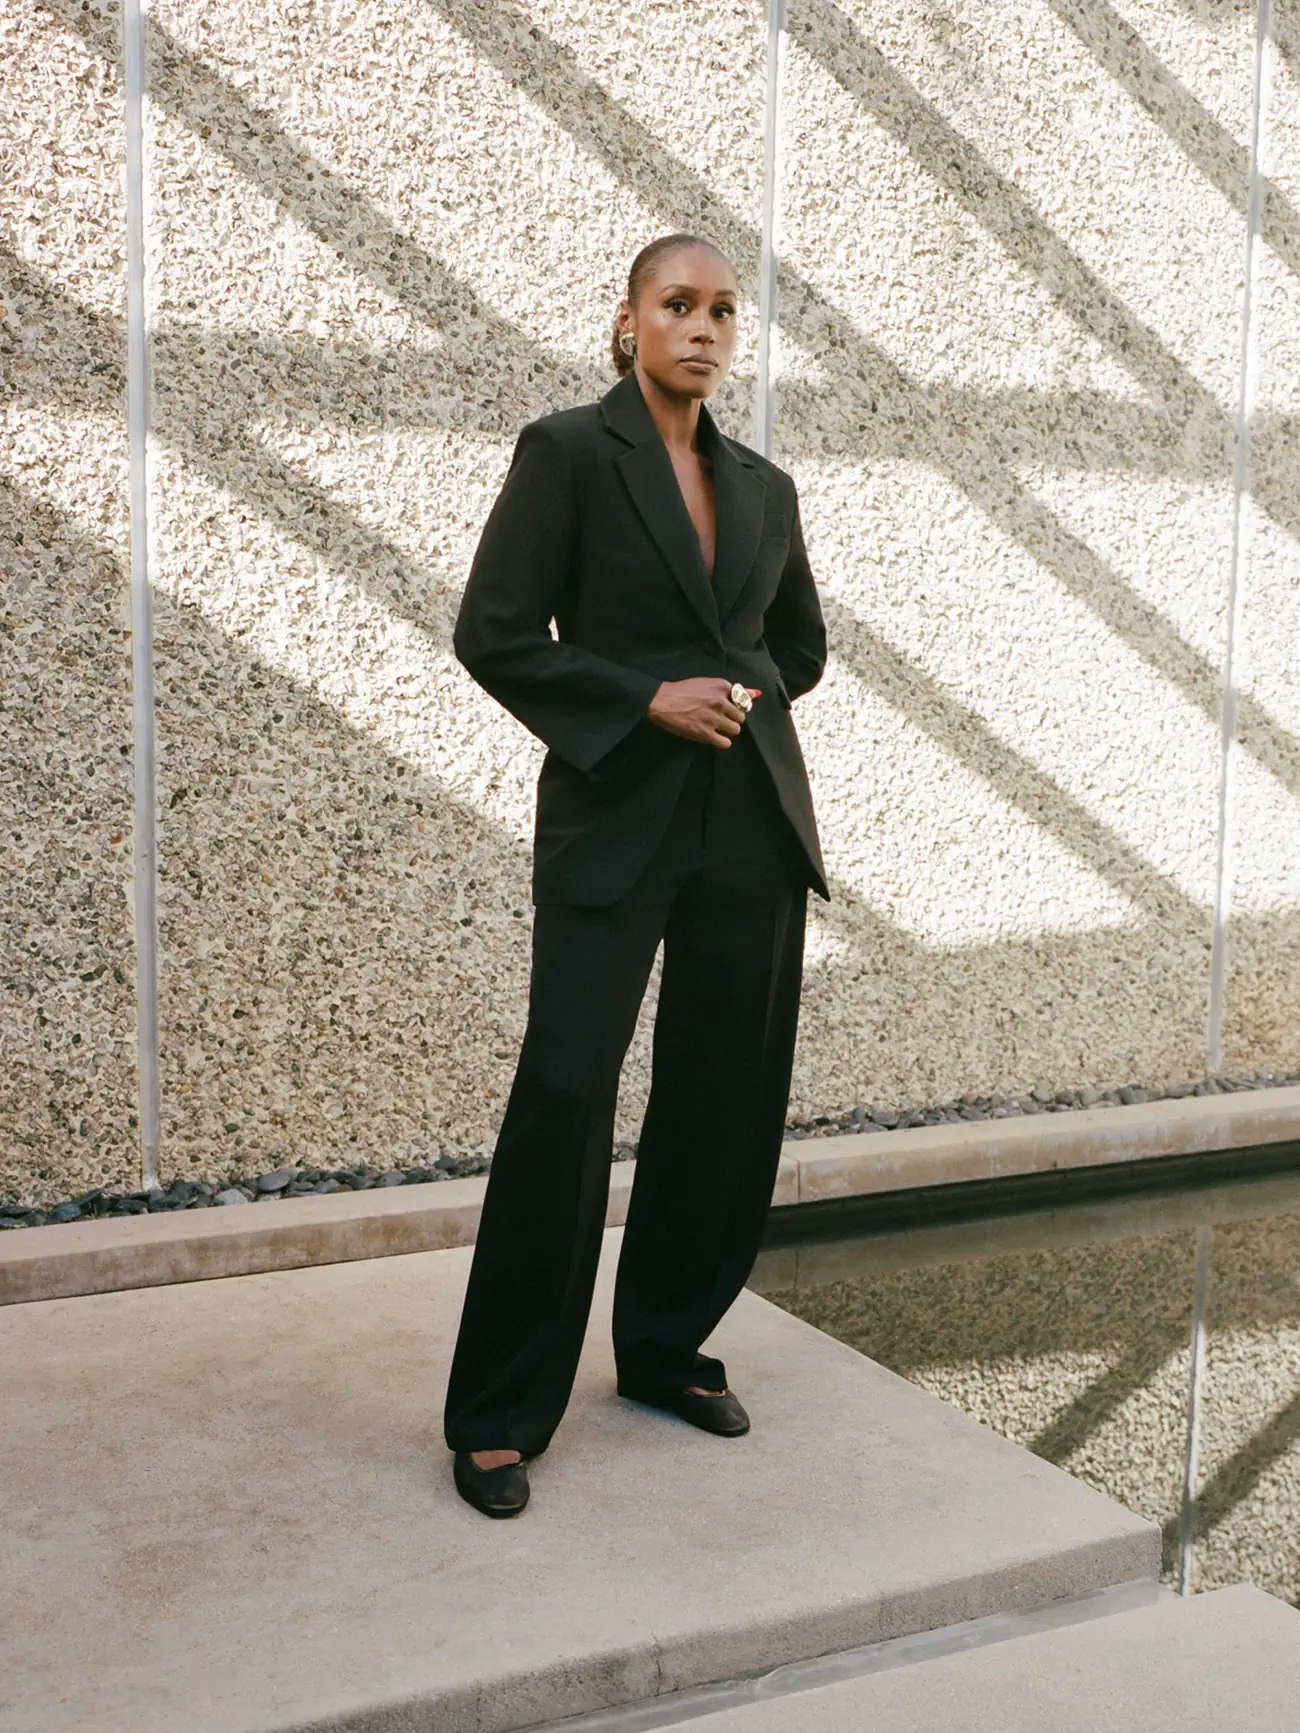 Issa Rae covers Porter Magazine January 29th, 2024 by Deirdre Lewis